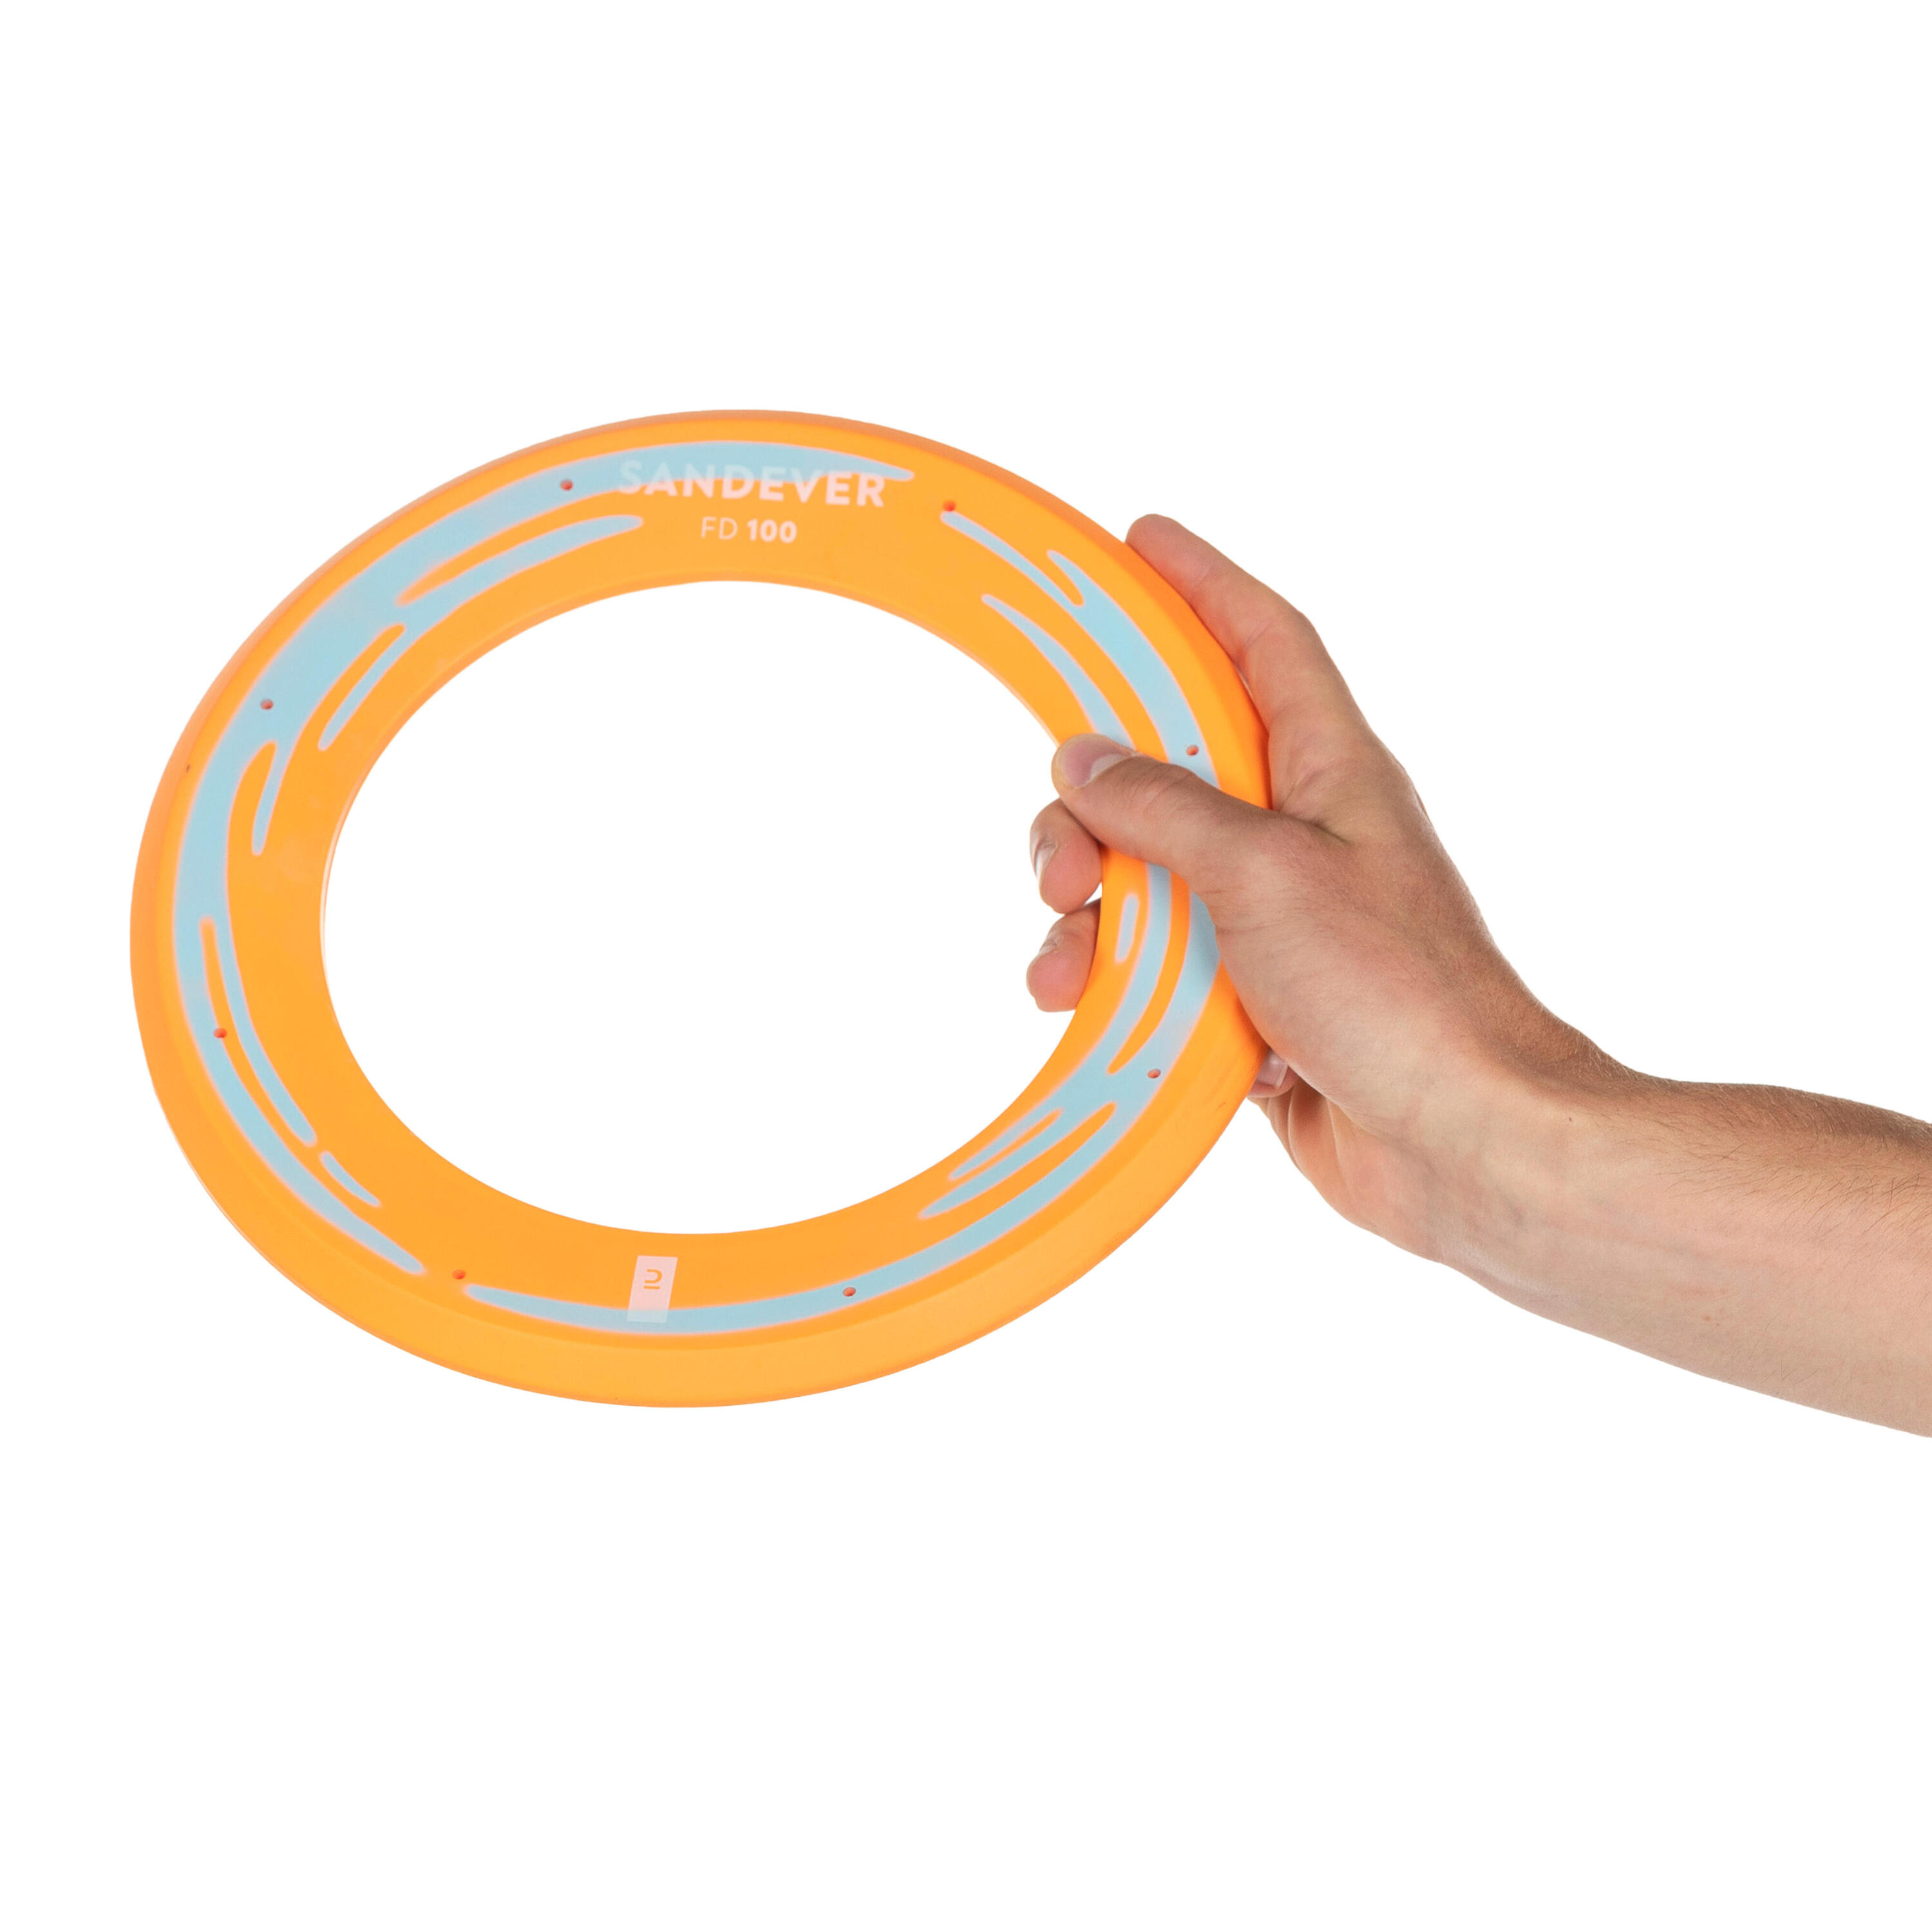 A soft orange disc for long-distance throws. 3/6